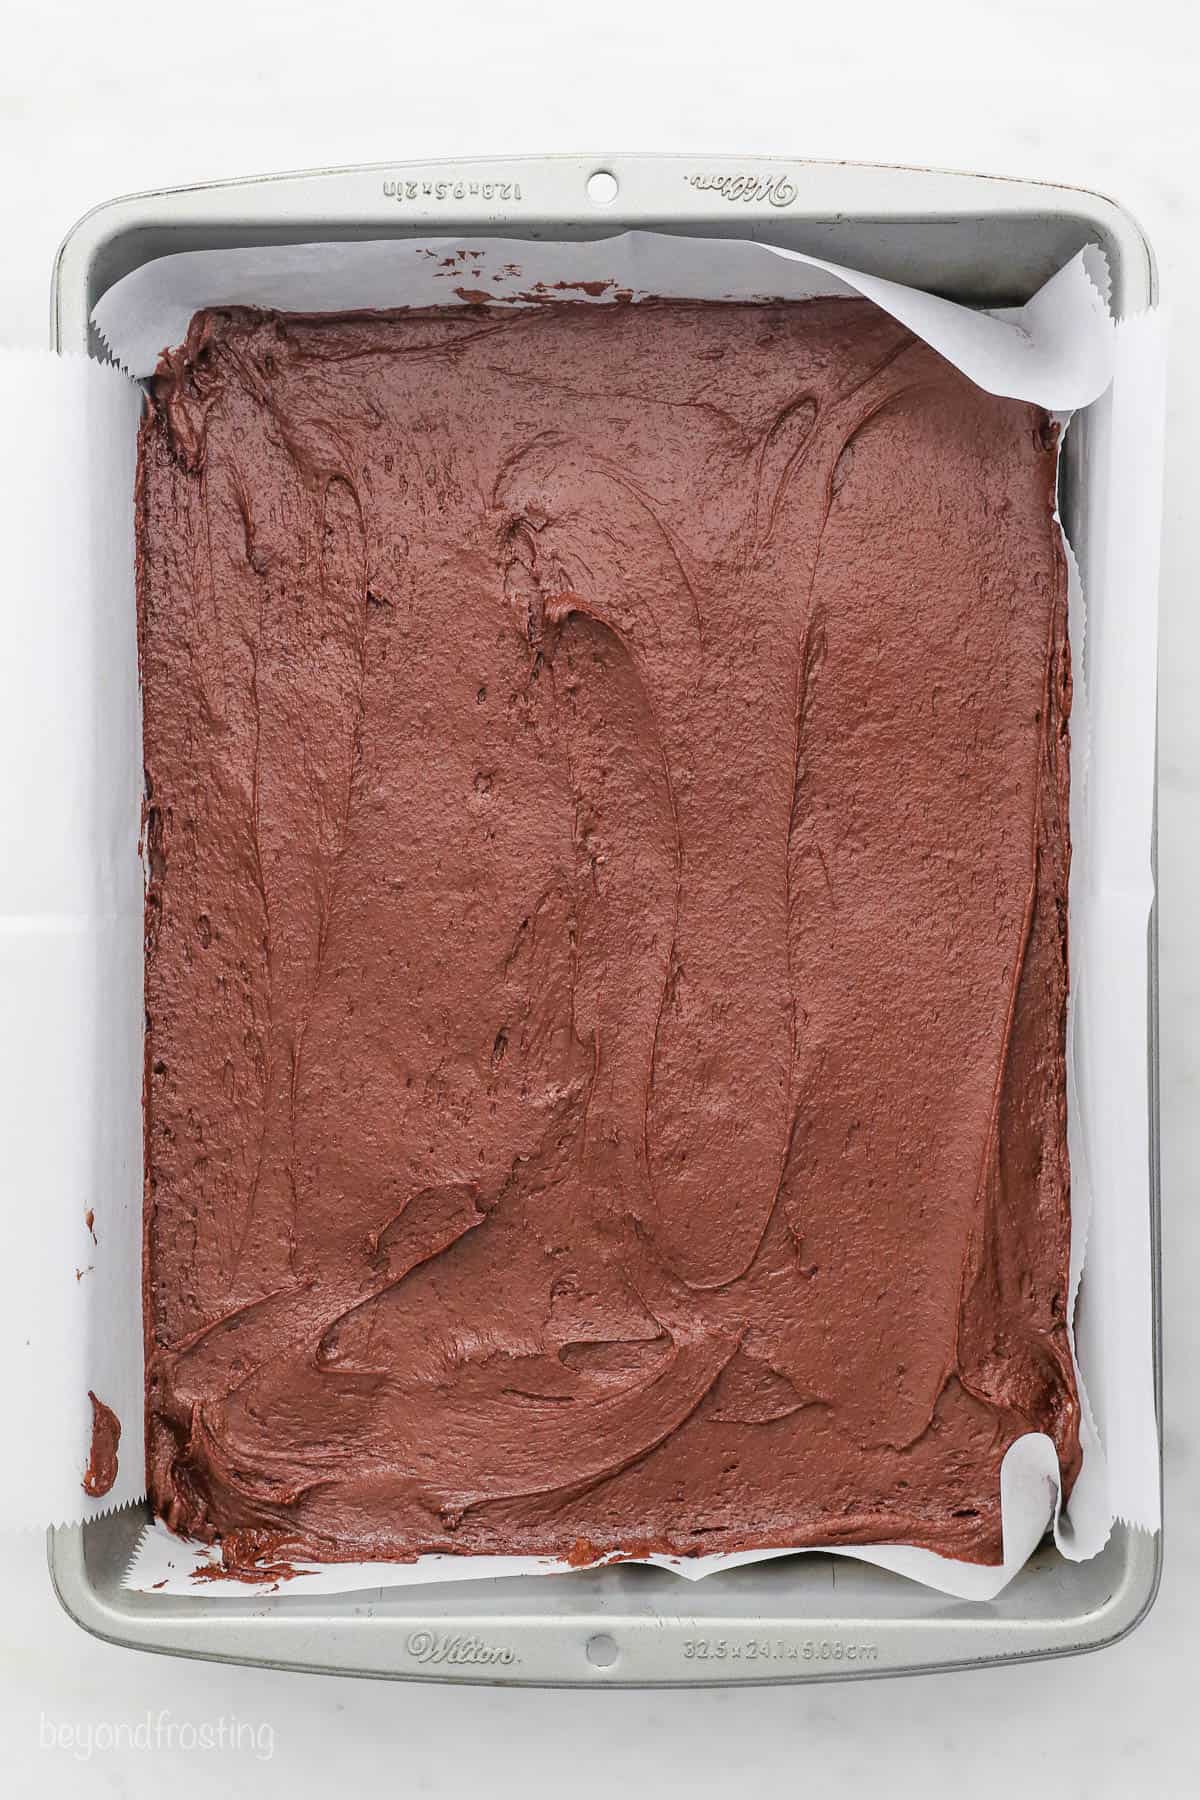 A baking pan filled with brownie batter